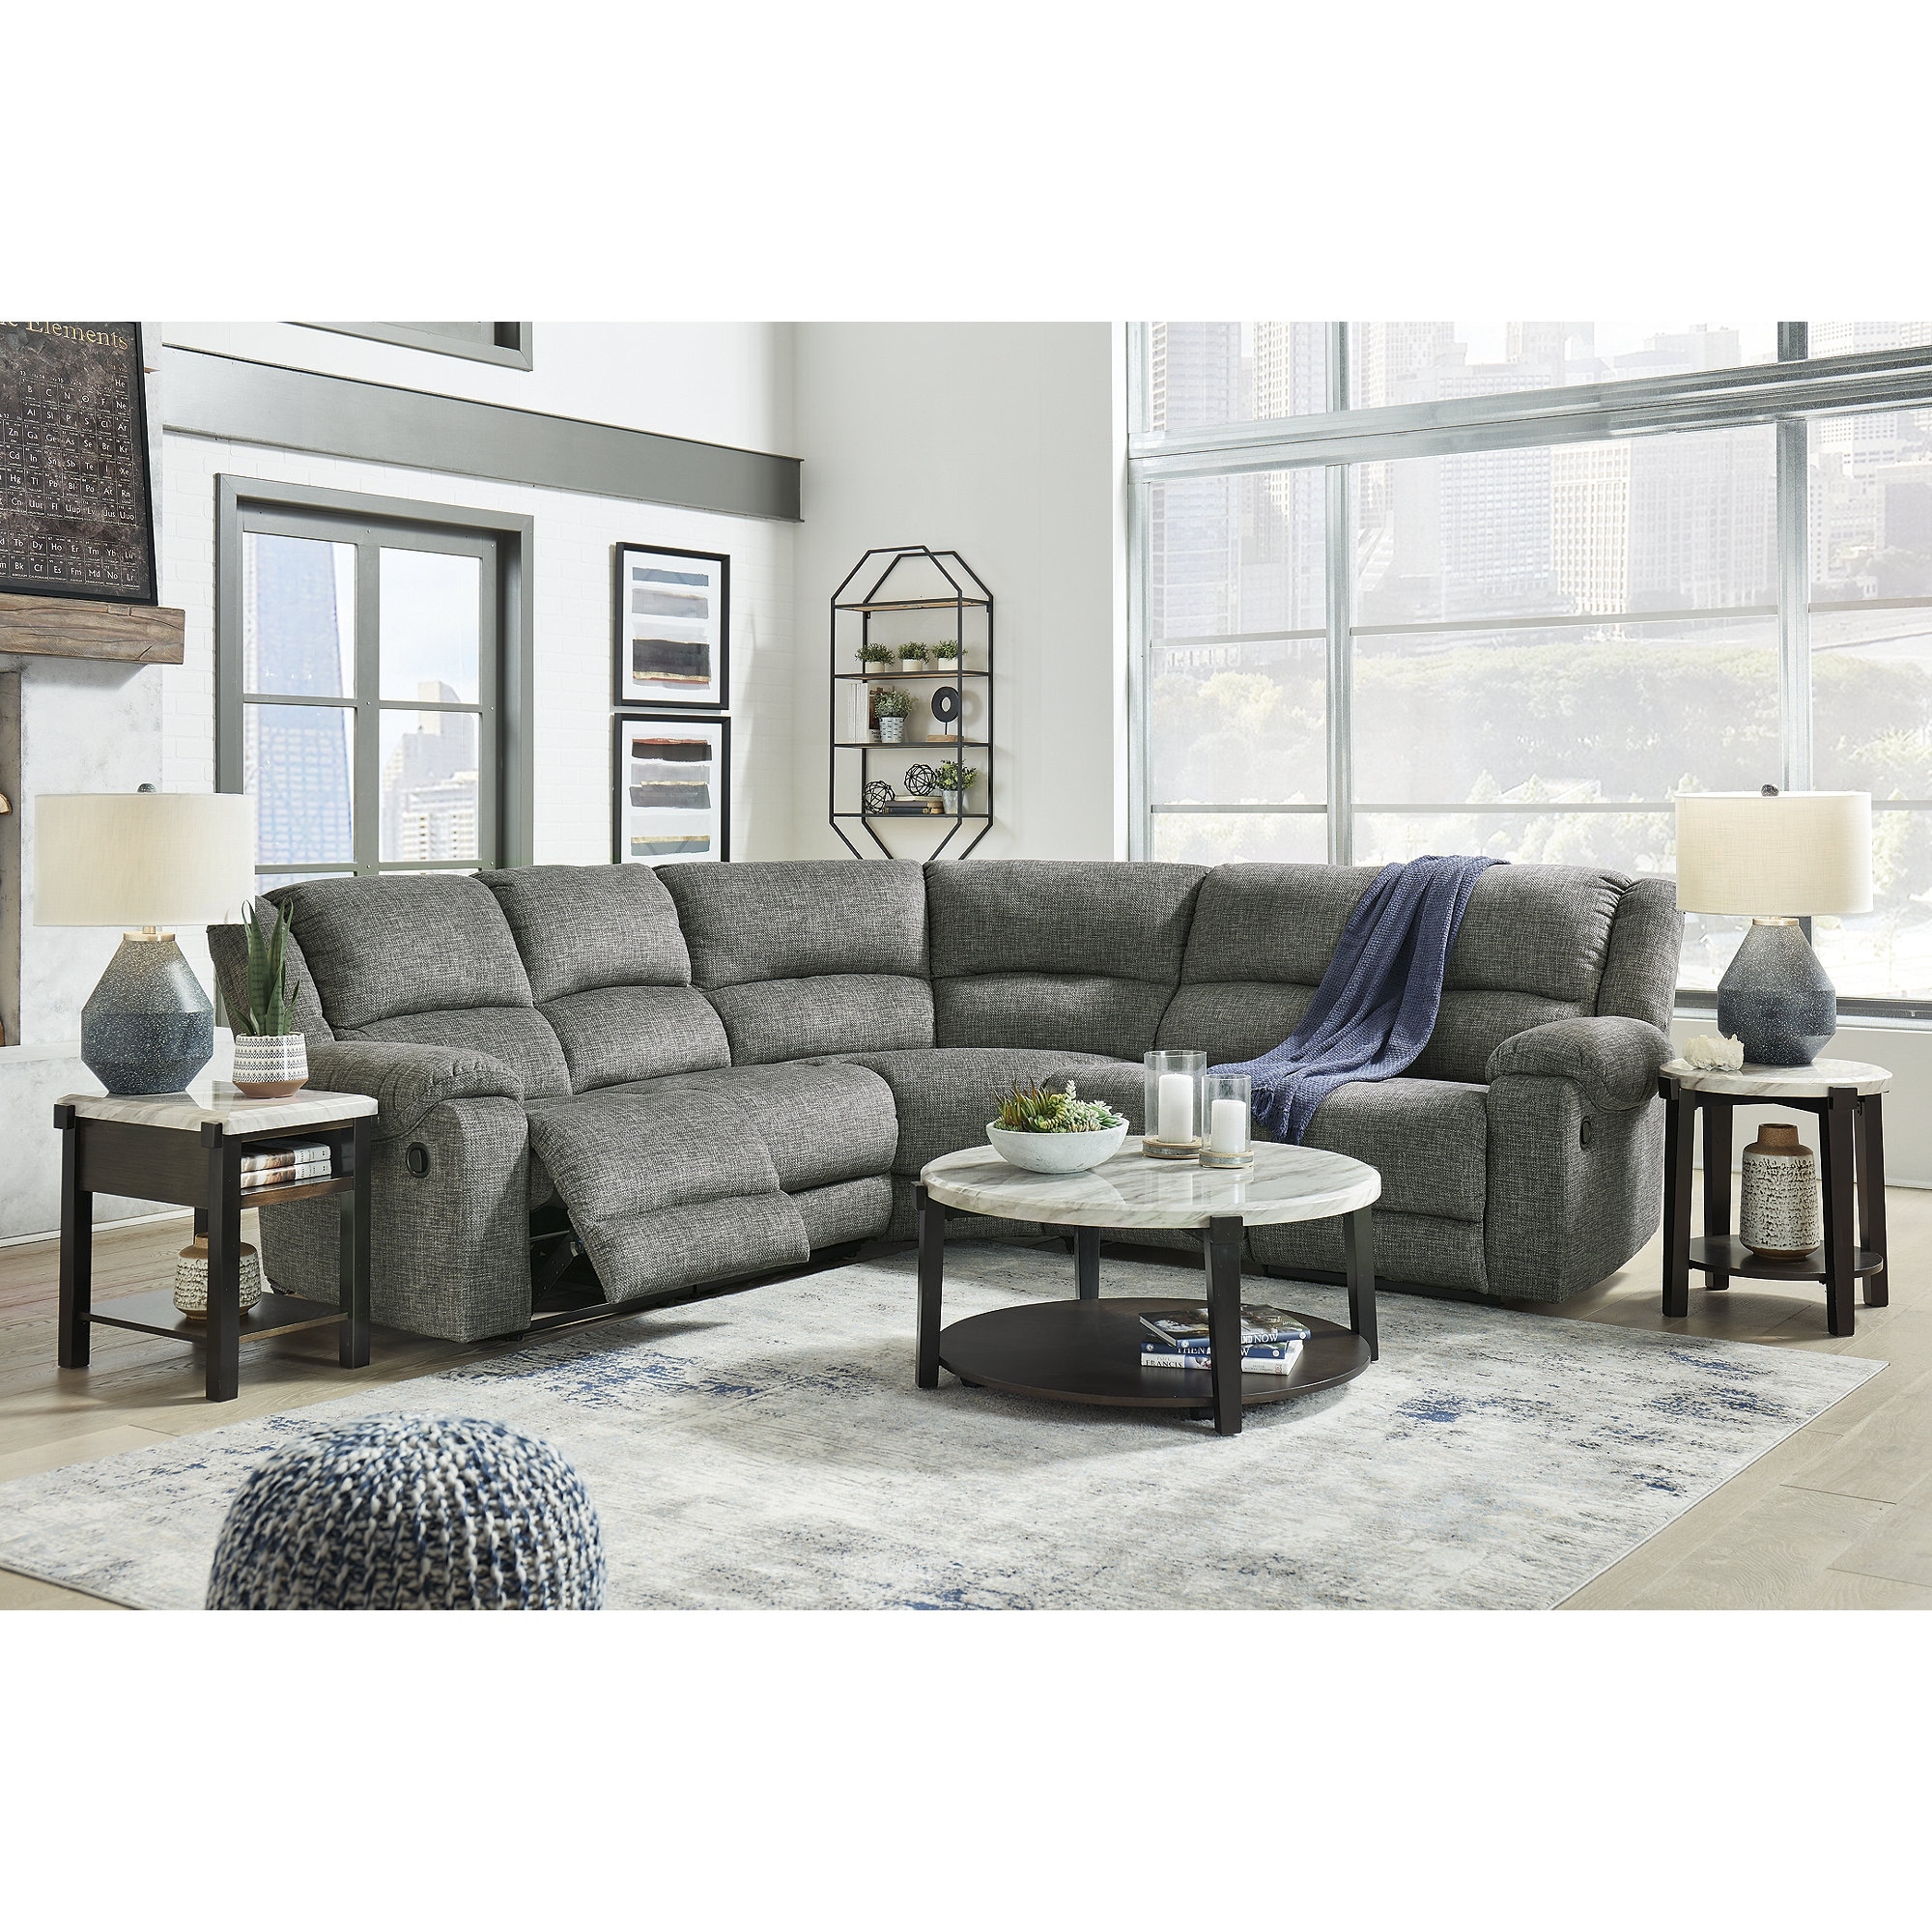 Signature Design By Ashley Goalie Pewter 5-piece Reclining Sectional - 128 W X 128 D X 39 H